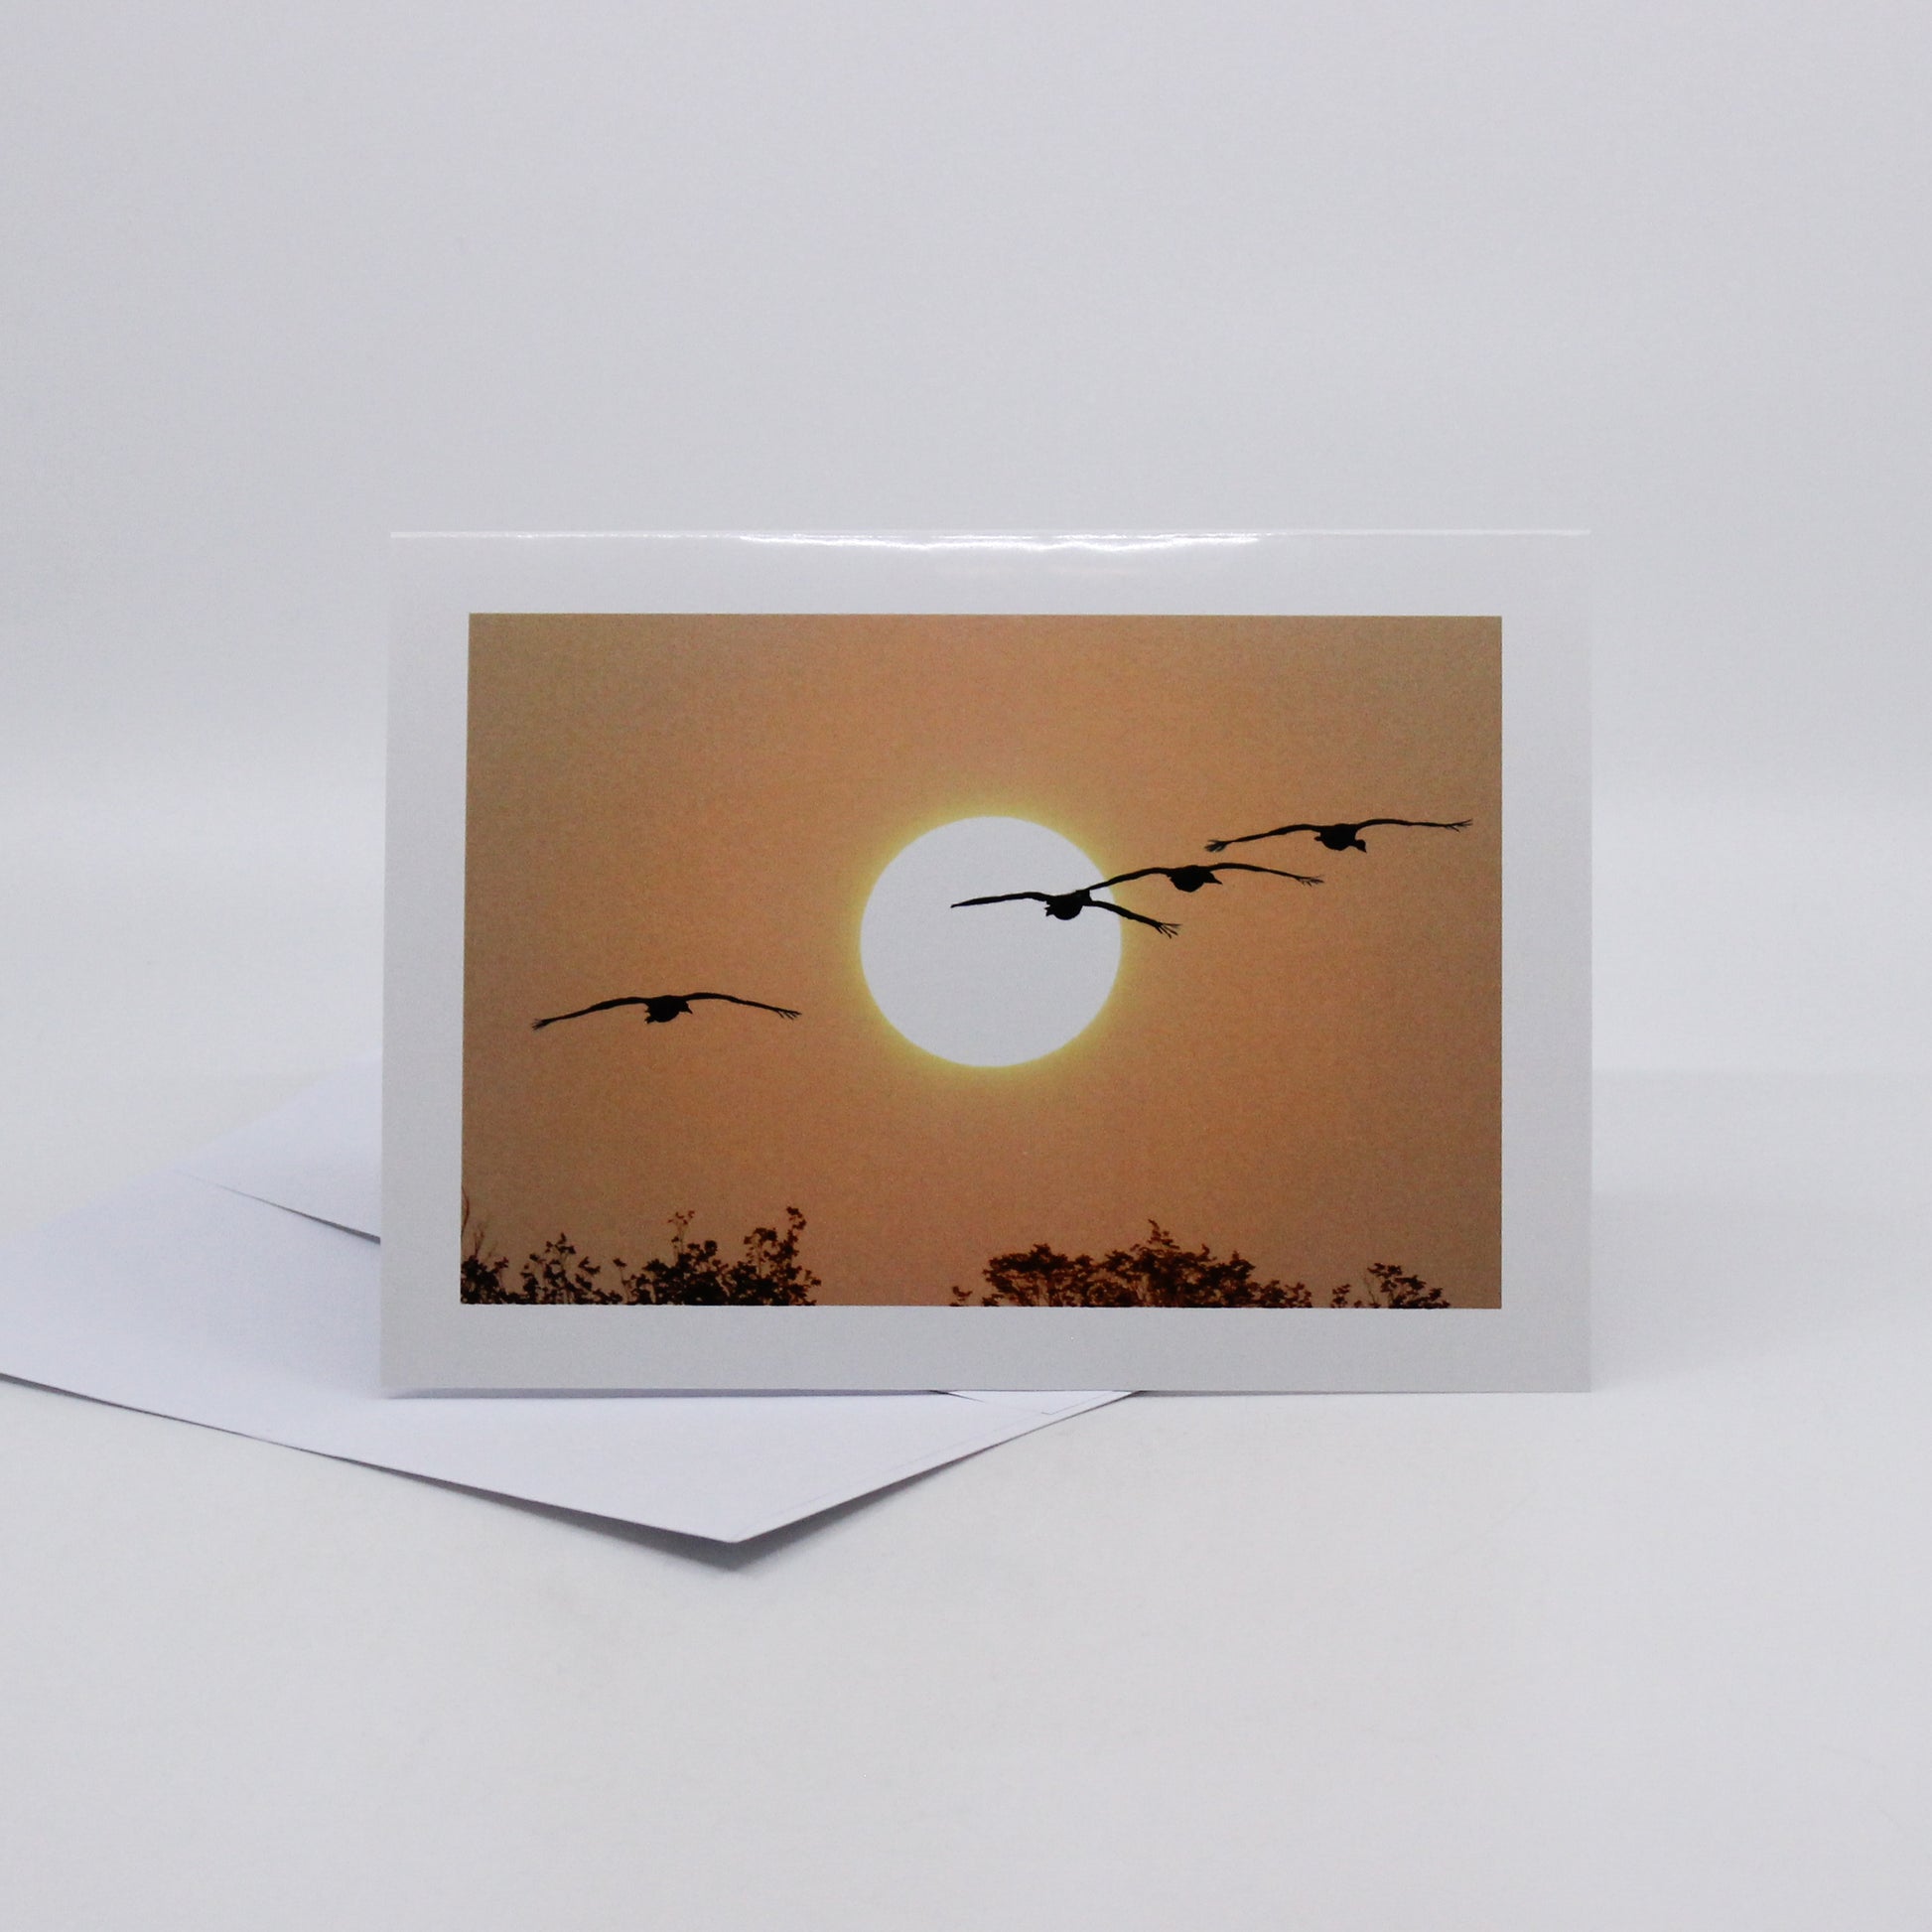 Photograph of flying birds and the sun